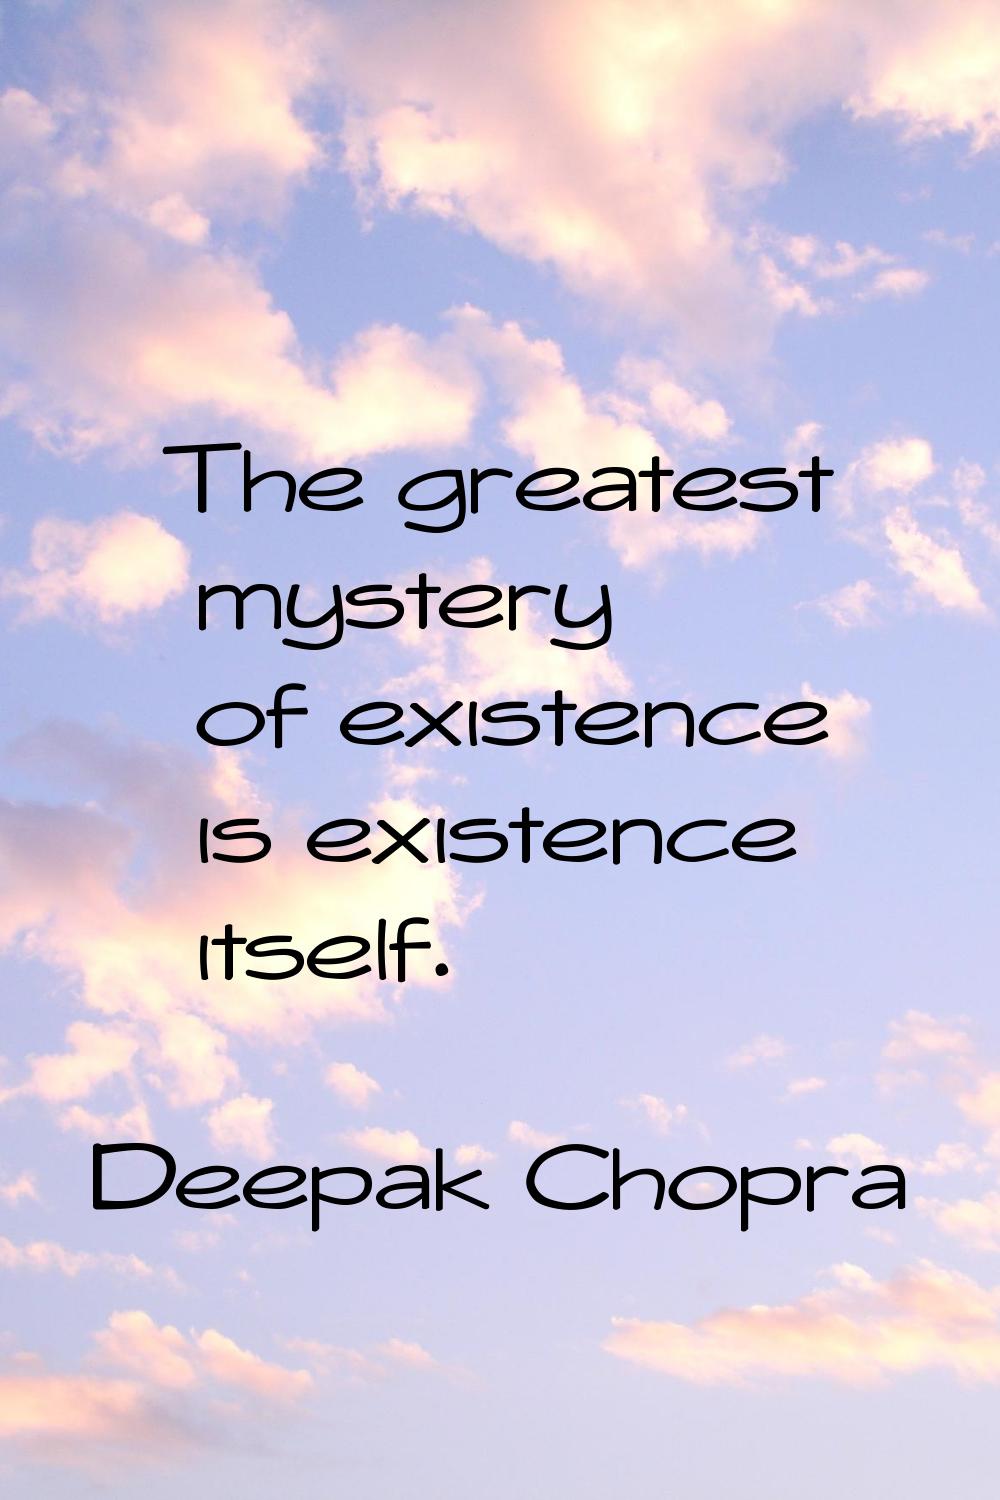 The greatest mystery of existence is existence itself.